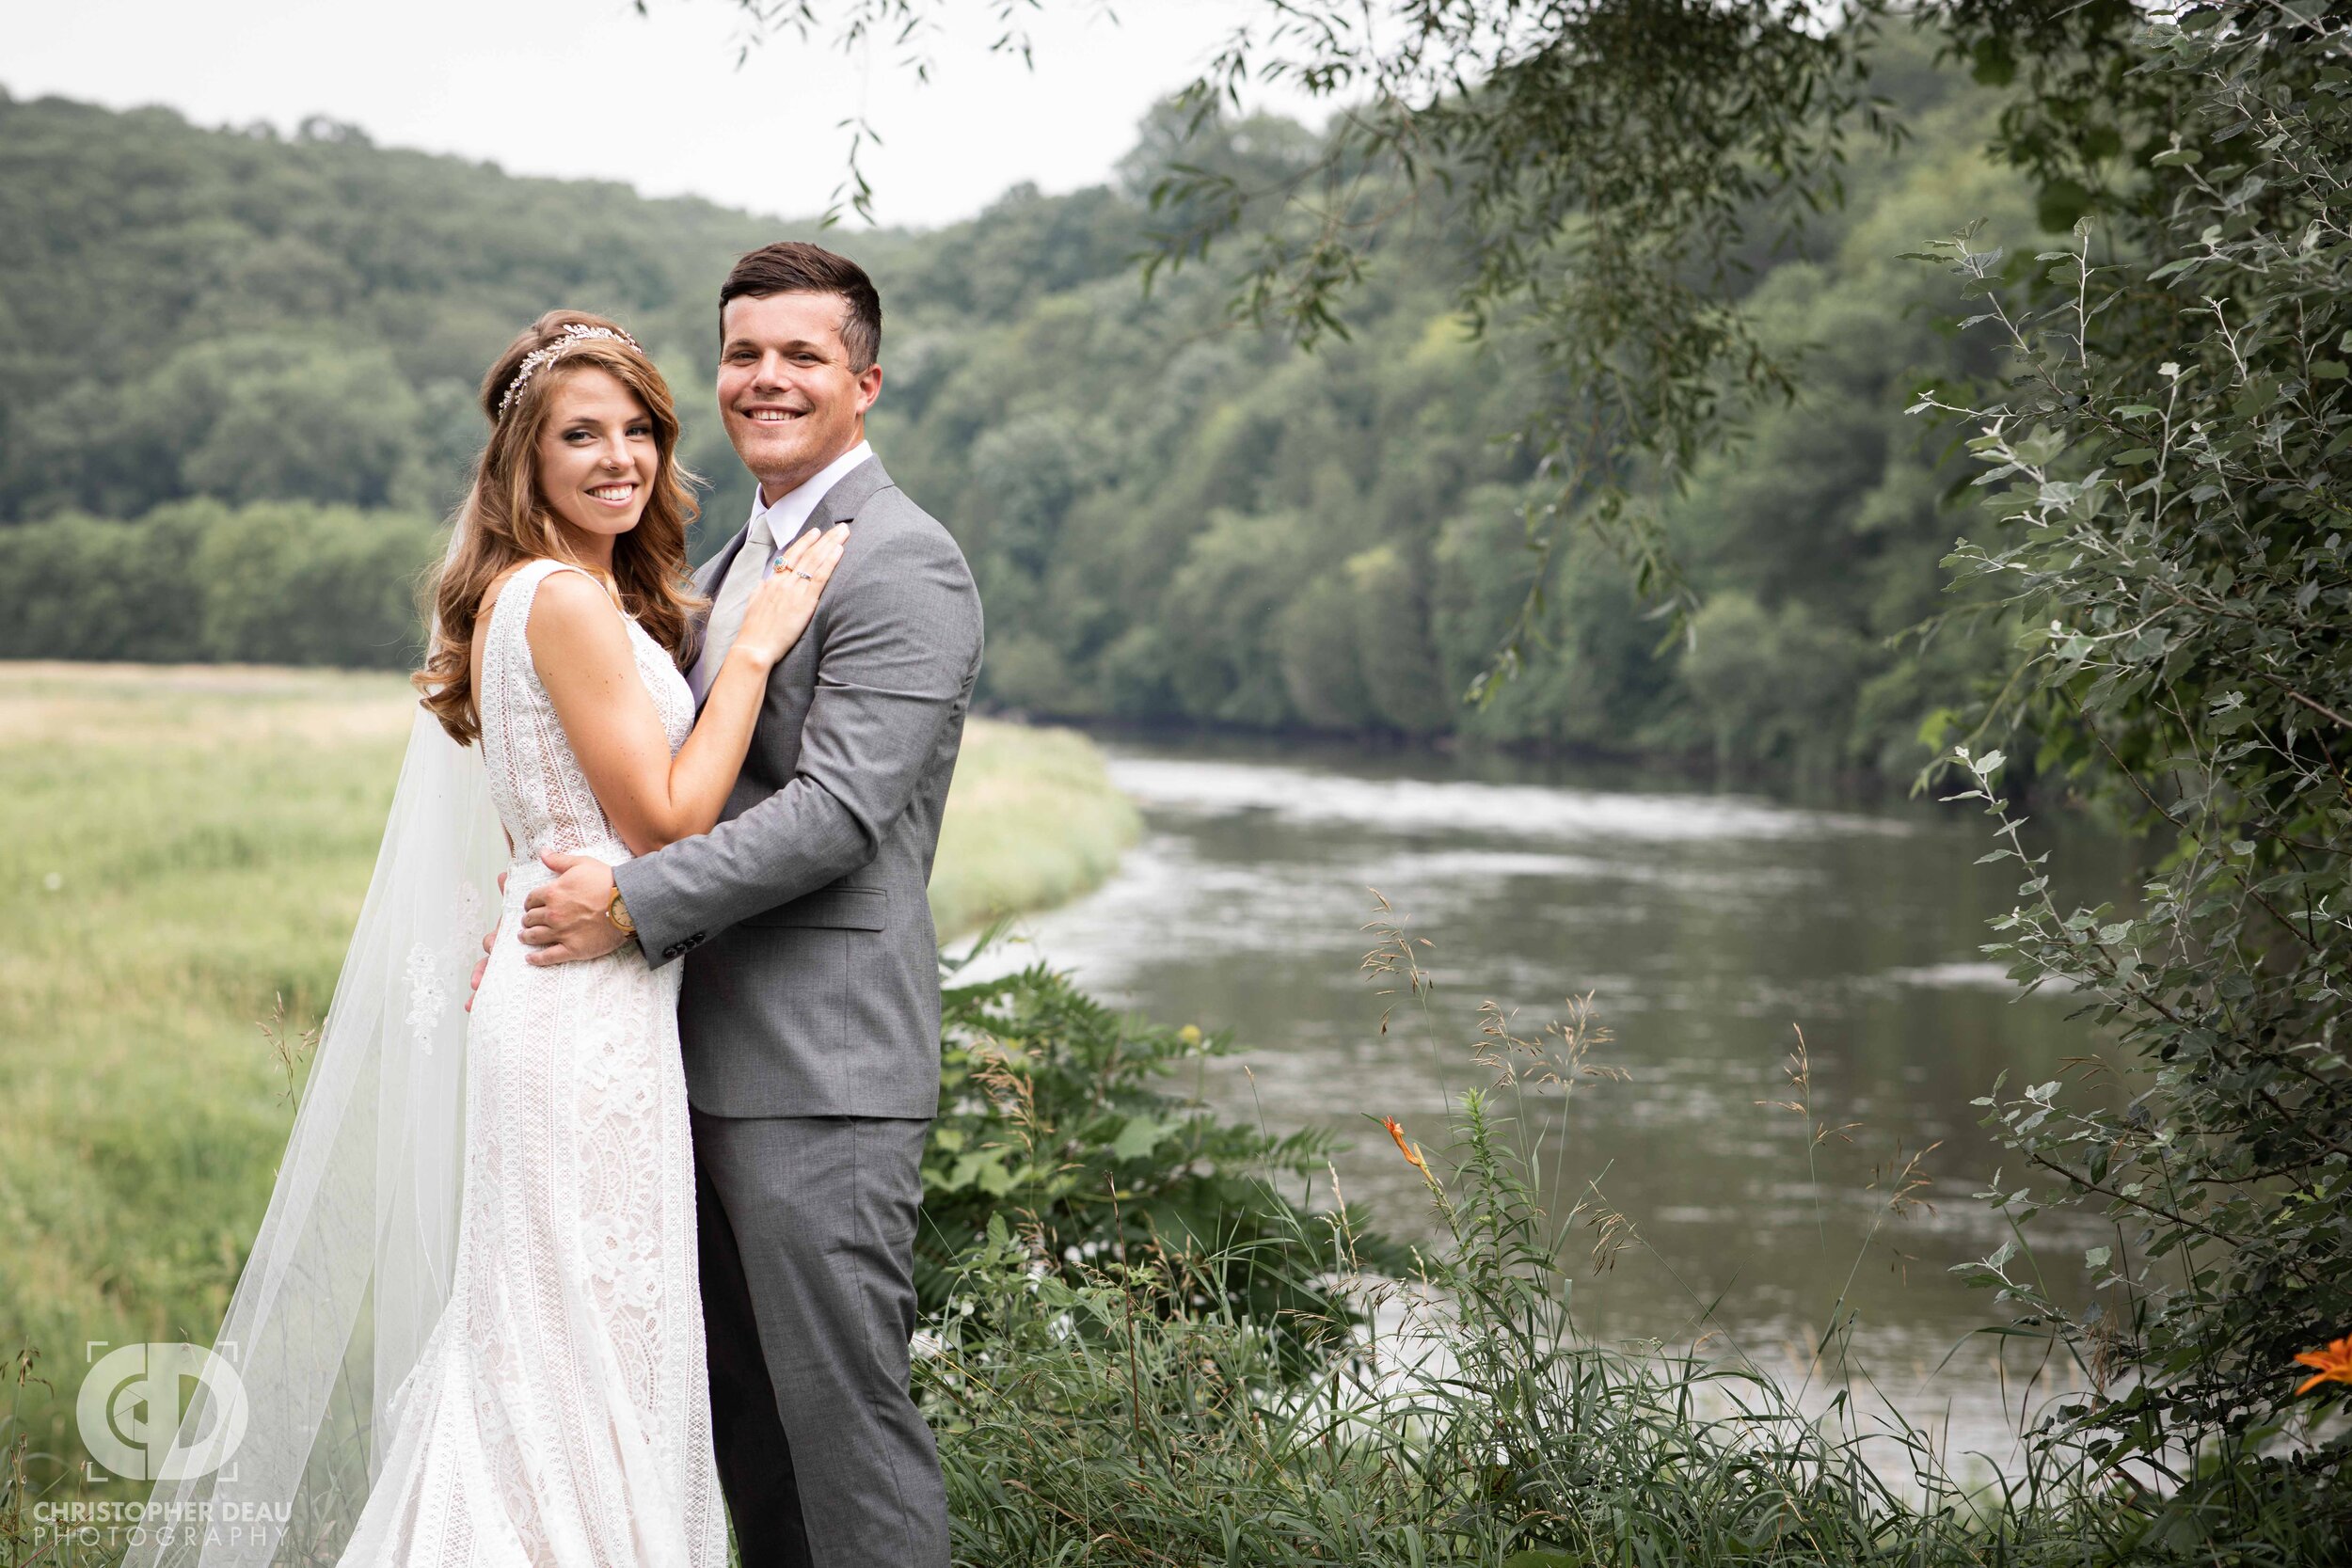  bride and groom pose for the wedding photographer in front of a beautiful field and flowing river. 